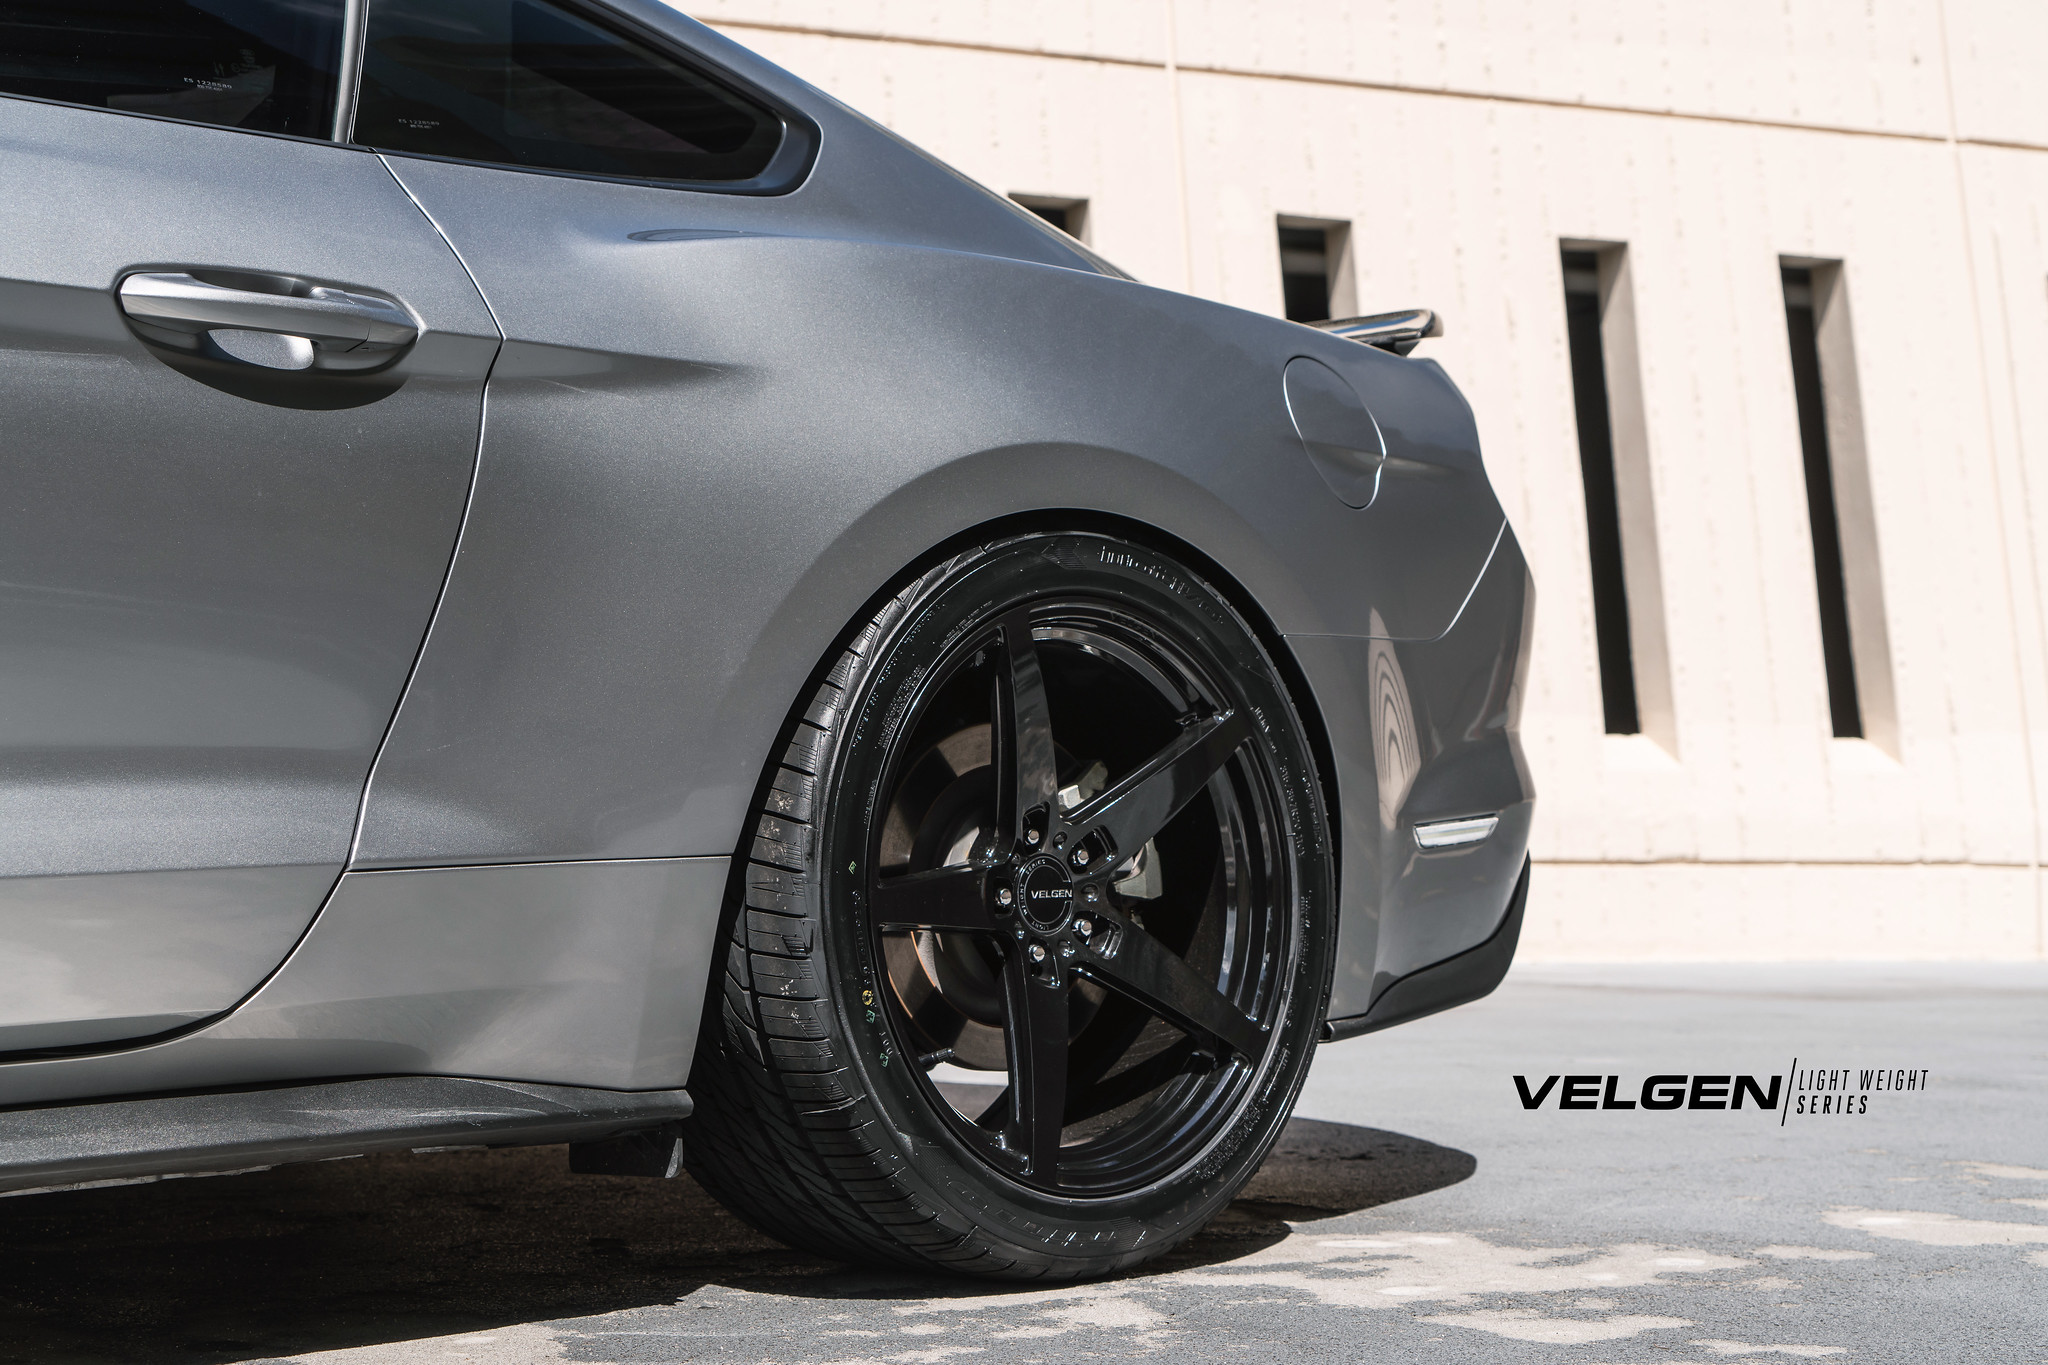 S650 Mustang Velgen wheels for your S650 Mustang | Vibe Motorsports 52306267773_2a86c5ac4d_k